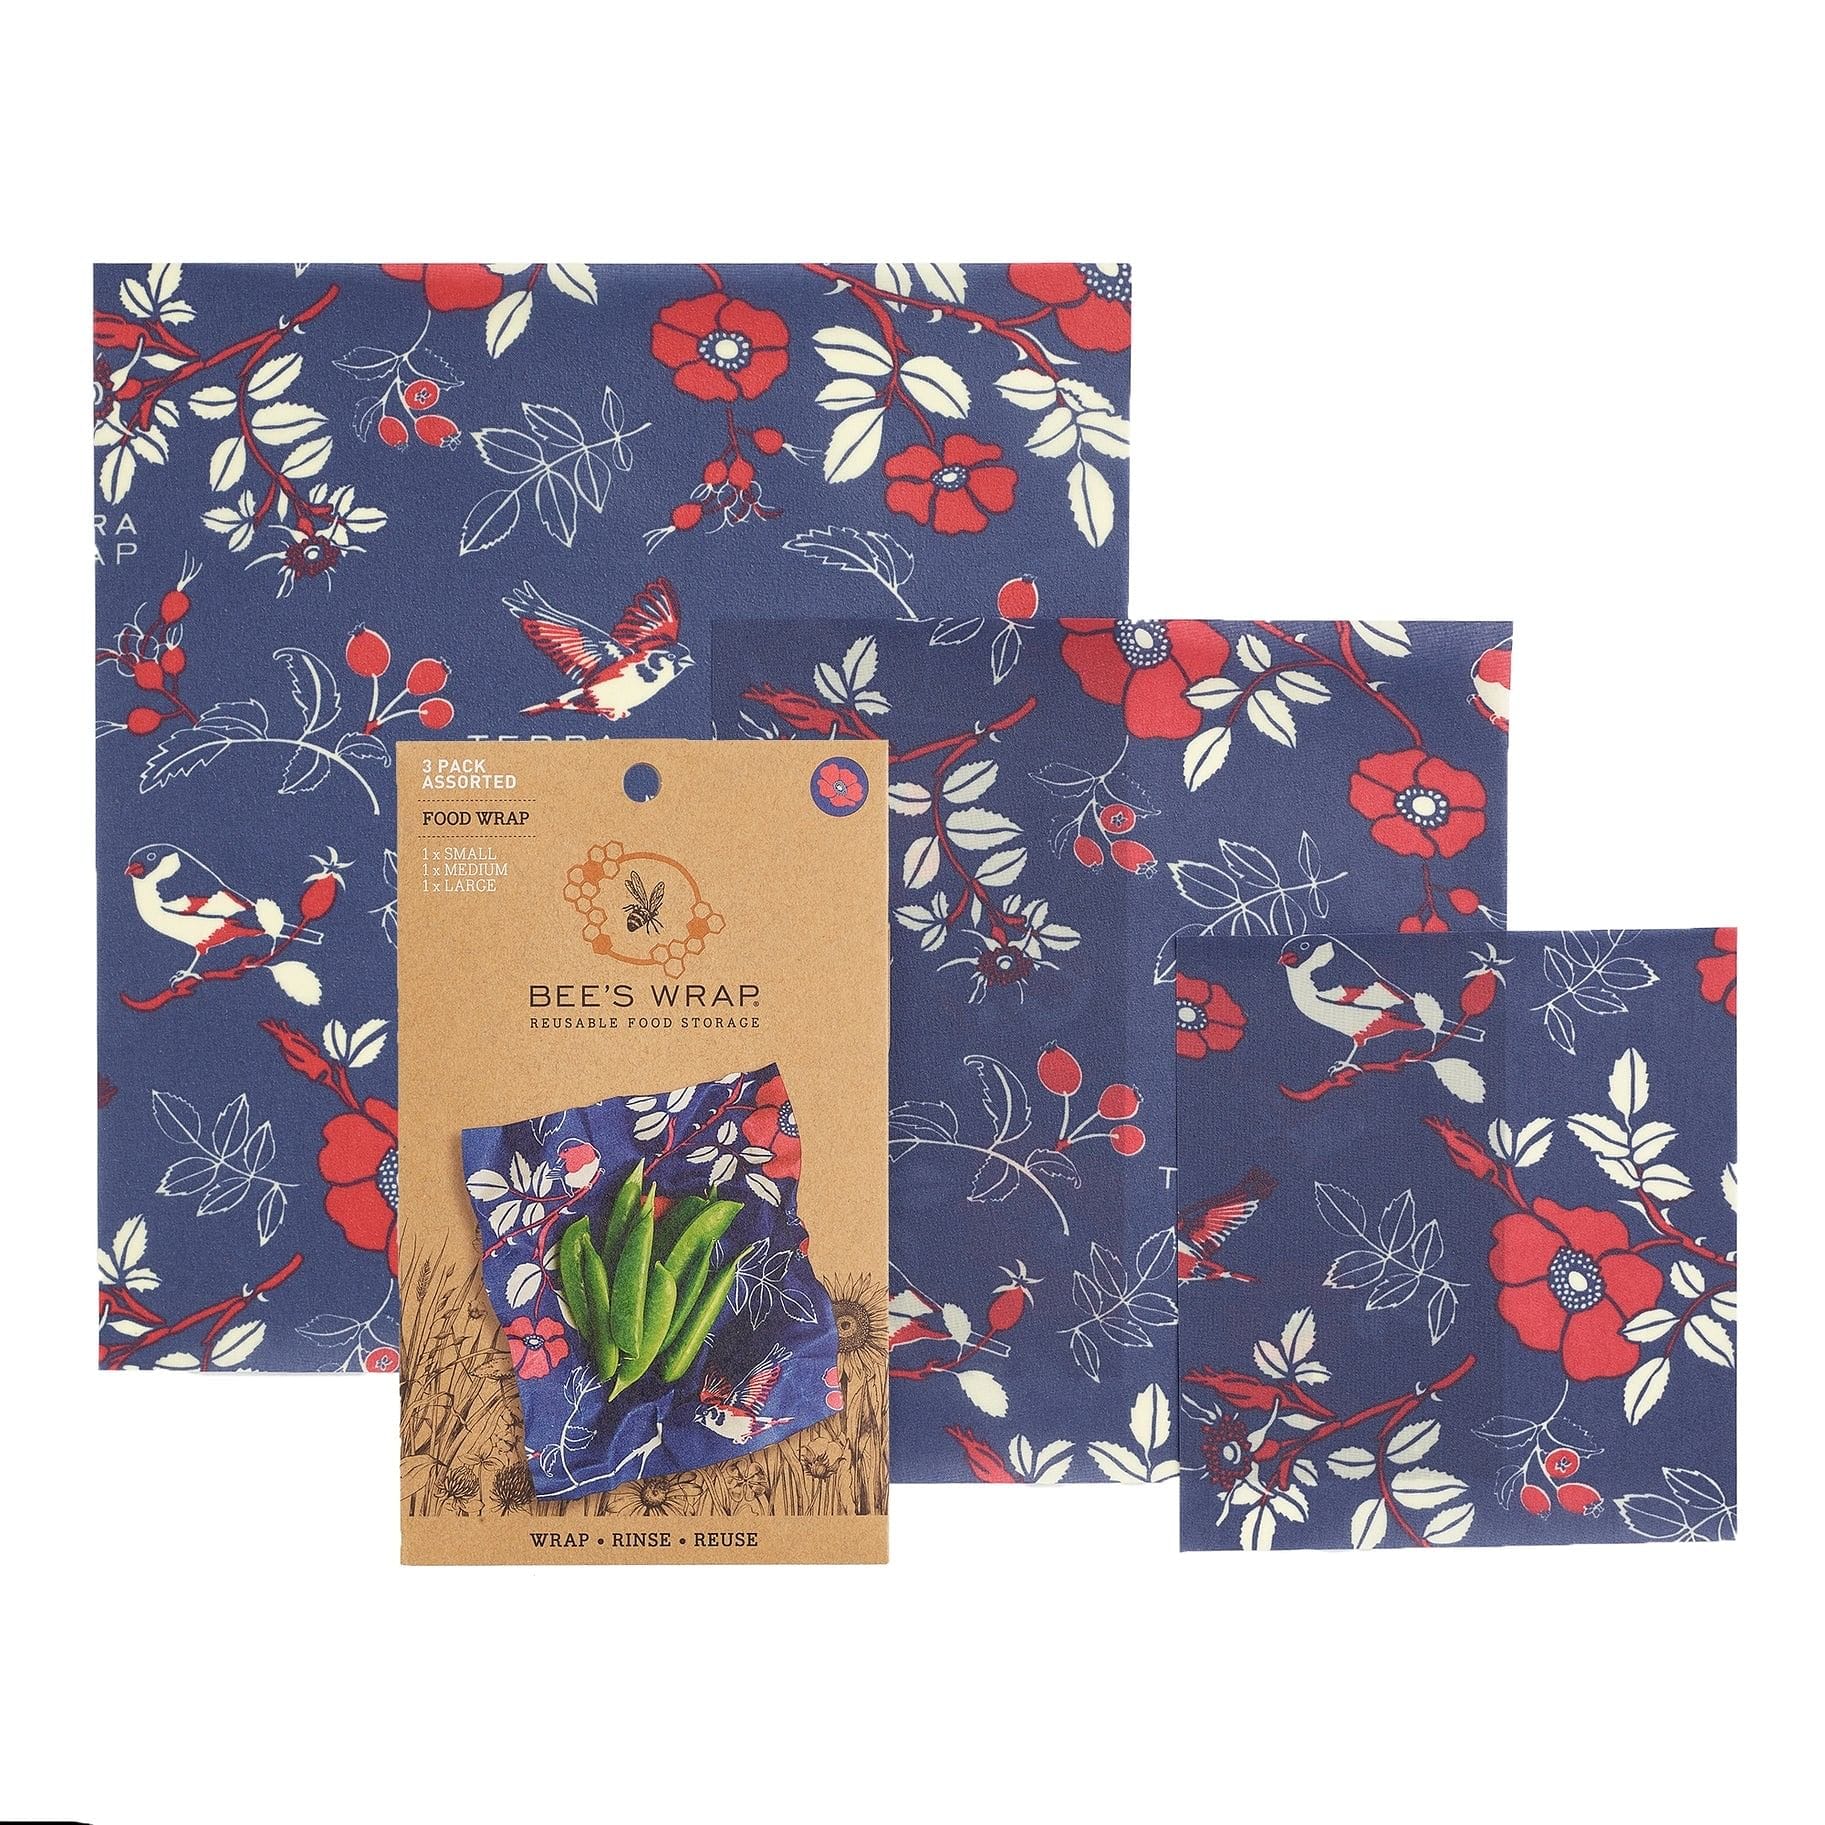 Bee's Wrap Food Wrap - Botanical Print - Assorted Wrap 3 Pack - Shelburne Country Store